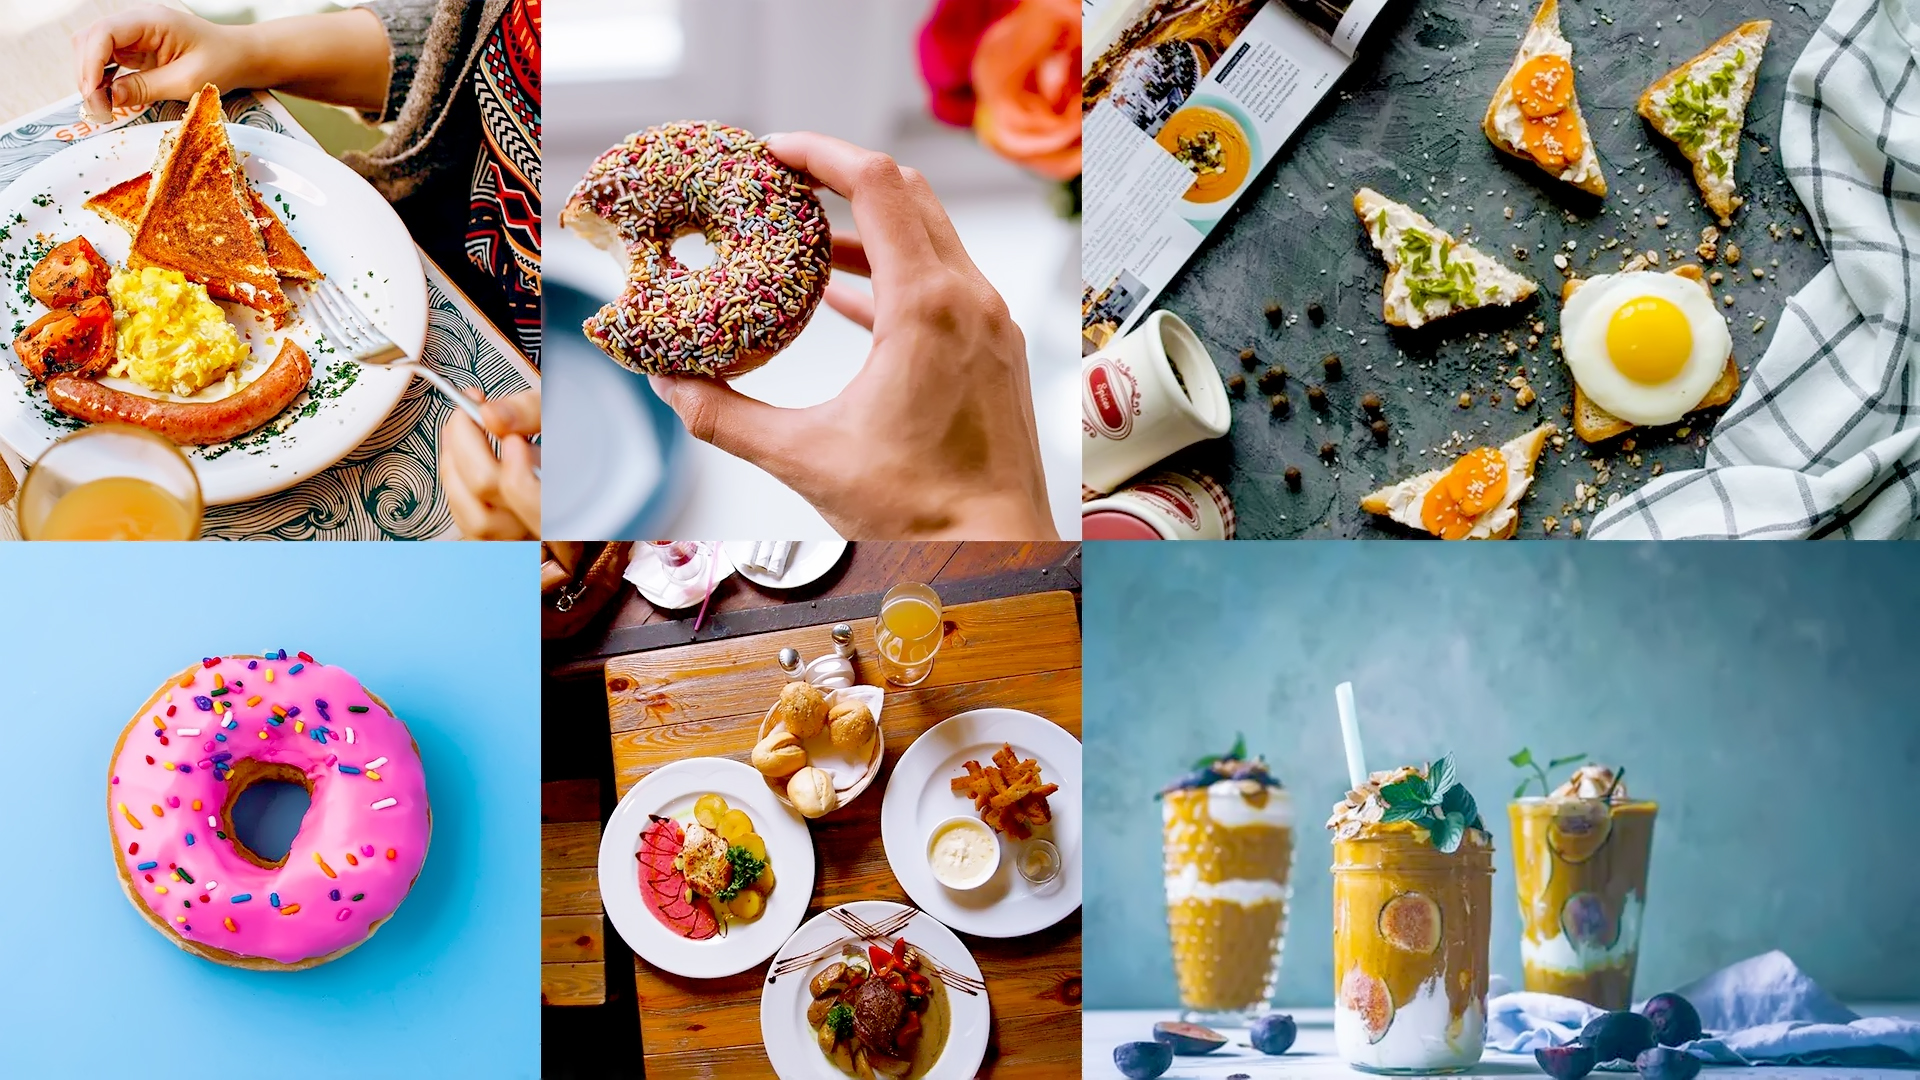 Food Photography: 10 Smart Tips To Capture Food With Smartphone Which Looks Really Professional